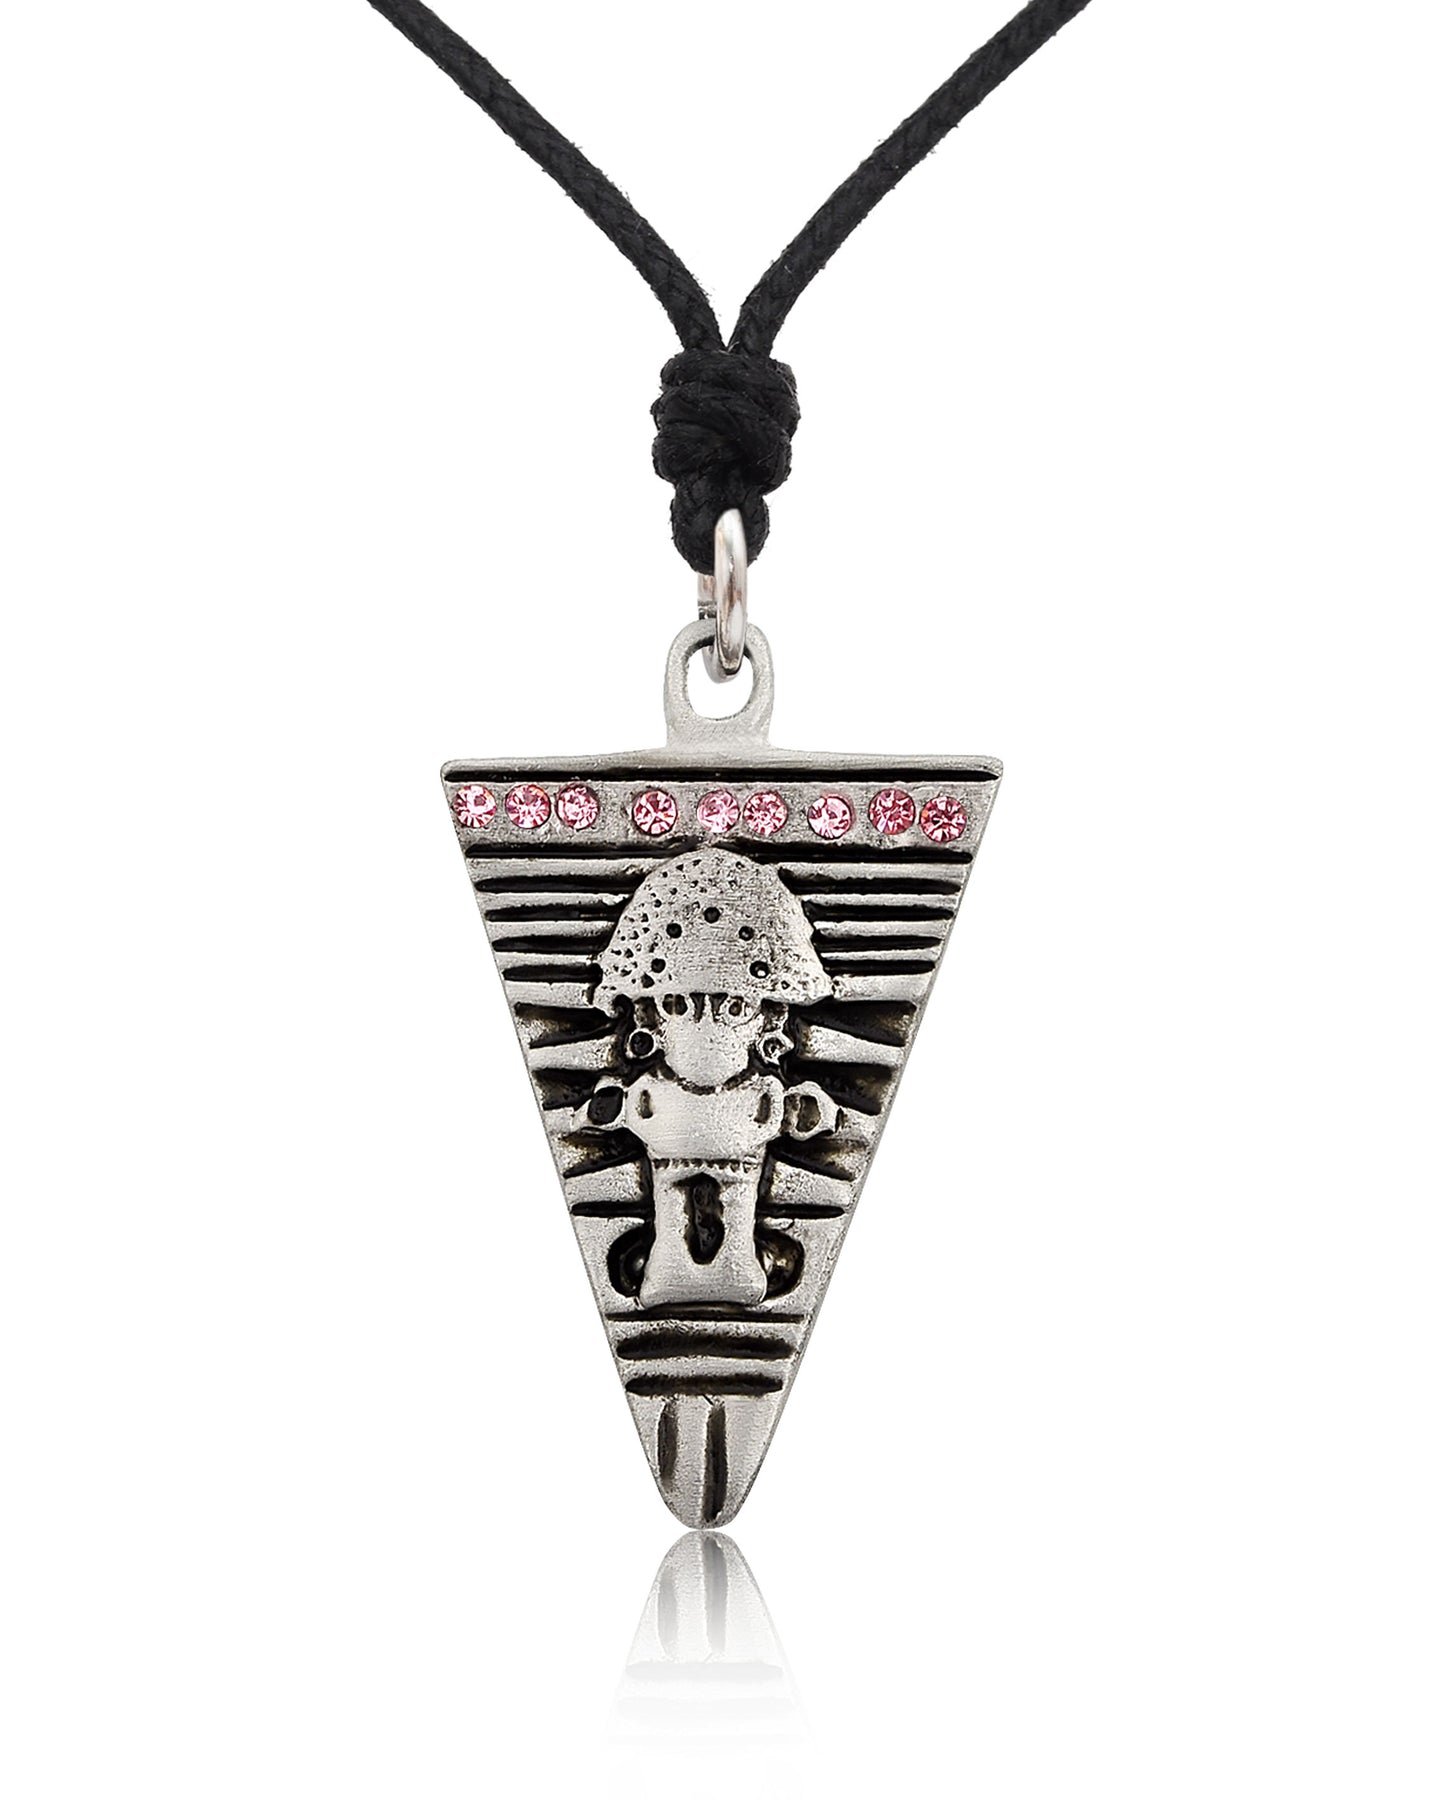 Aztec Mayan Design Silver Pewter Gold Brass Charm Necklace Pendant Jewelry